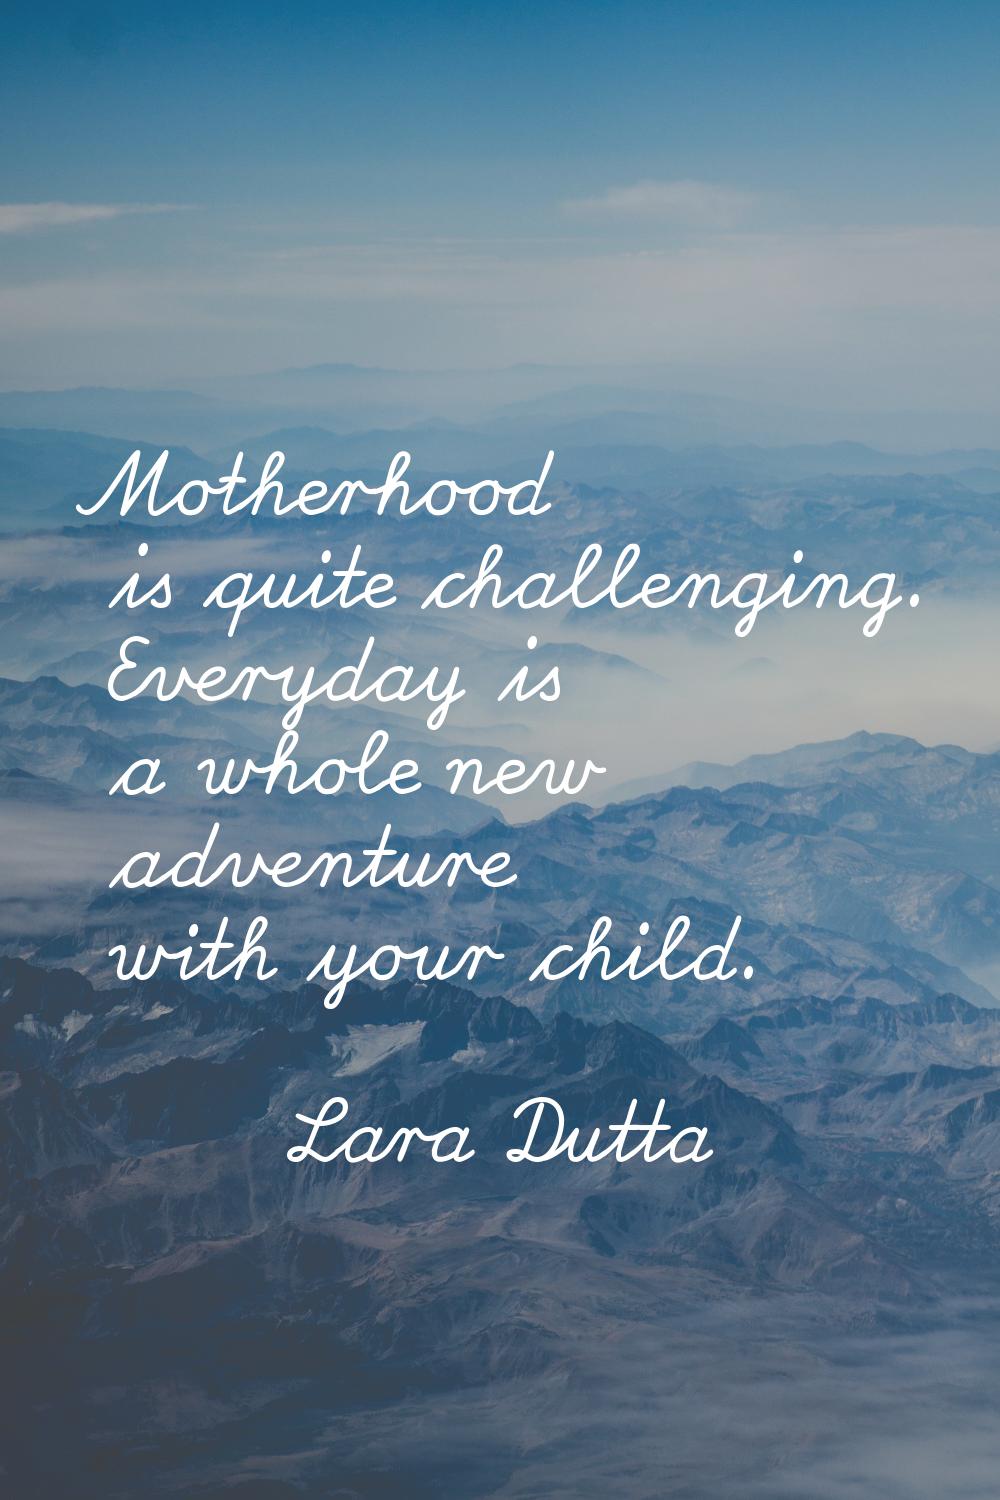 Motherhood is quite challenging. Everyday is a whole new adventure with your child.